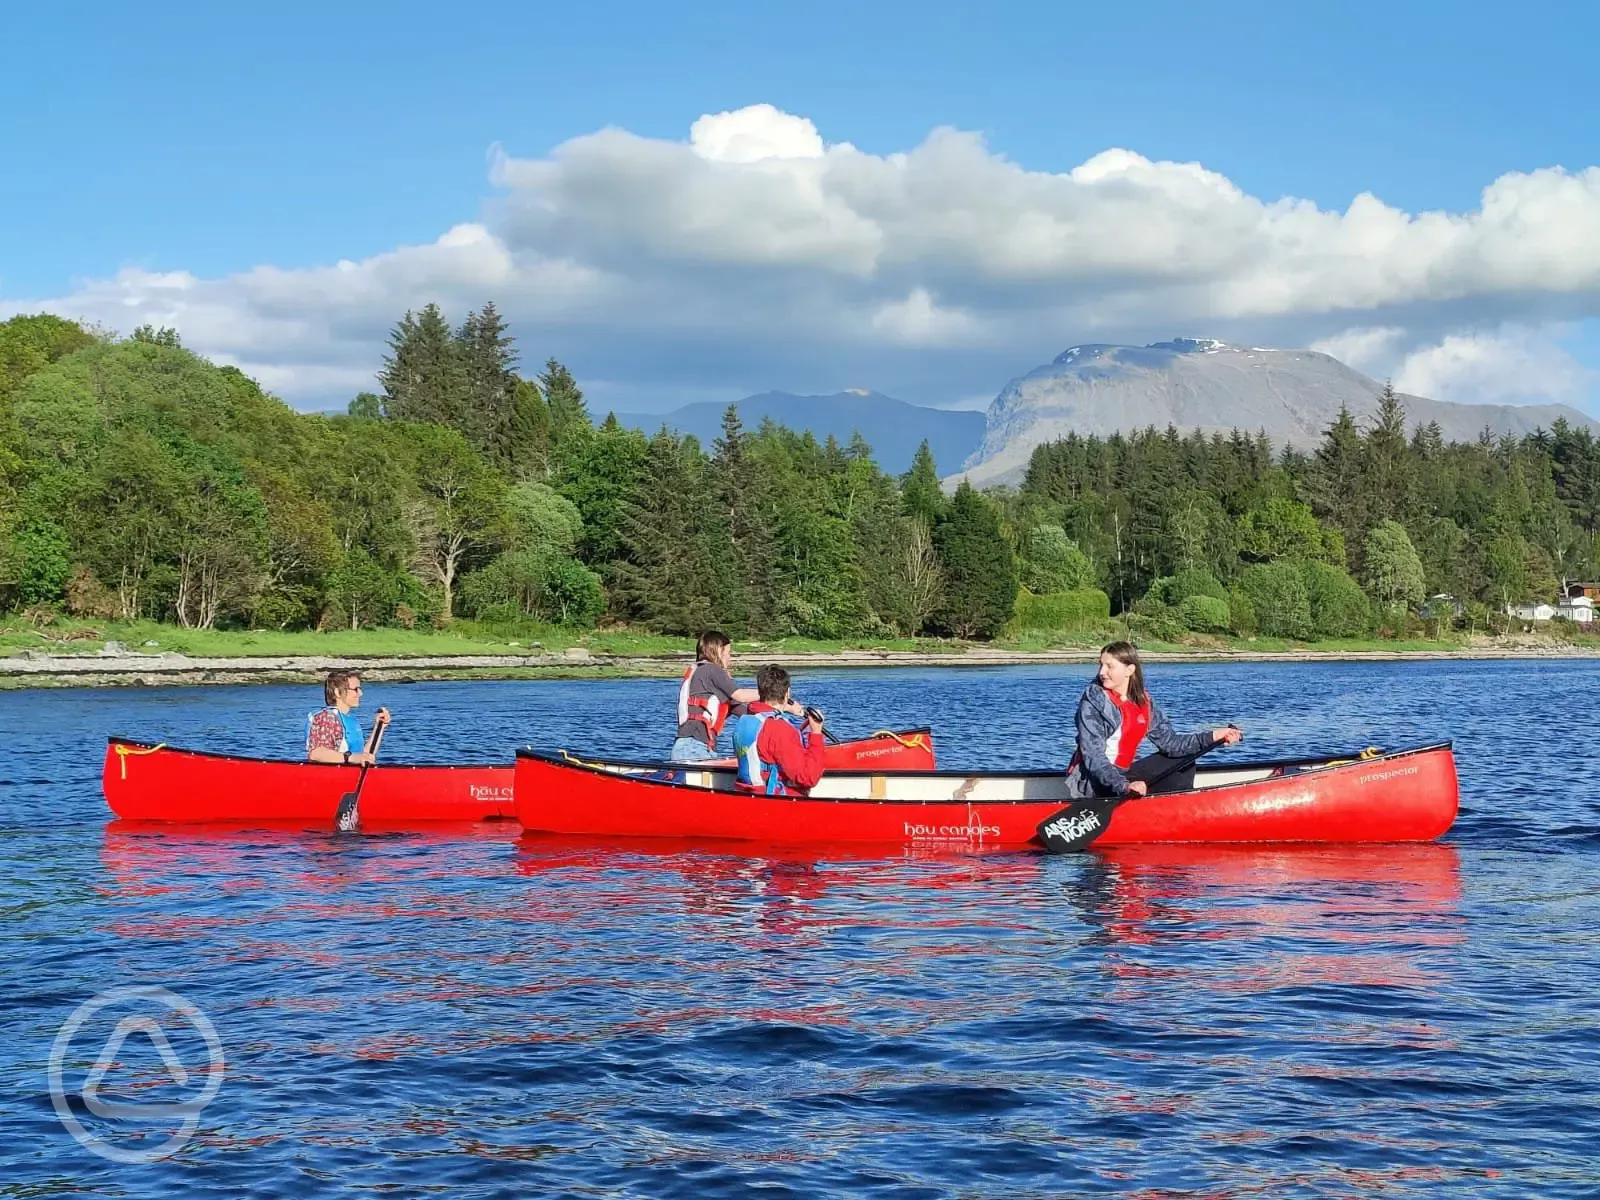 Watersports on the loch